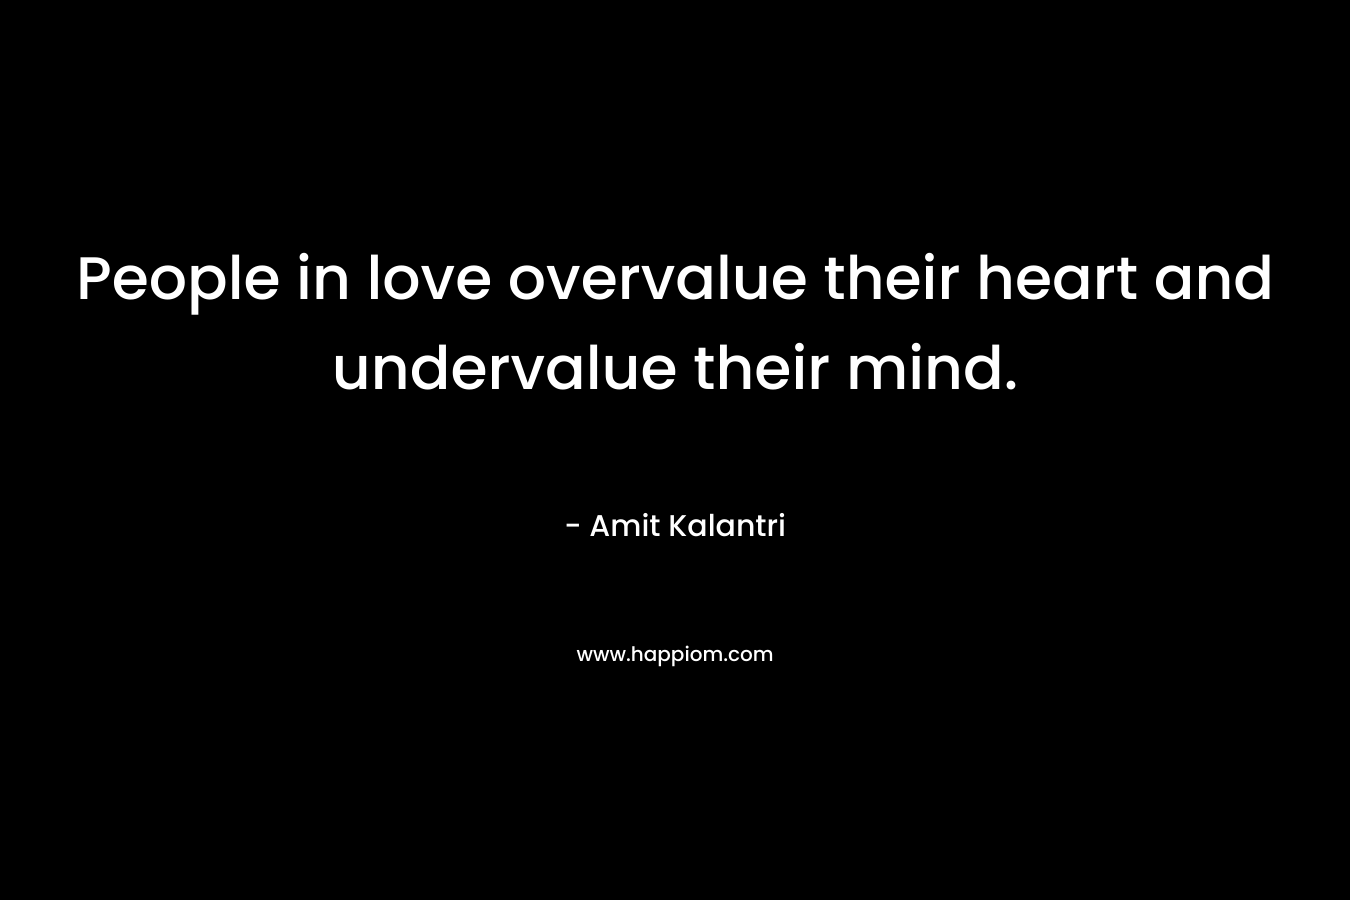 People in love overvalue their heart and undervalue their mind.